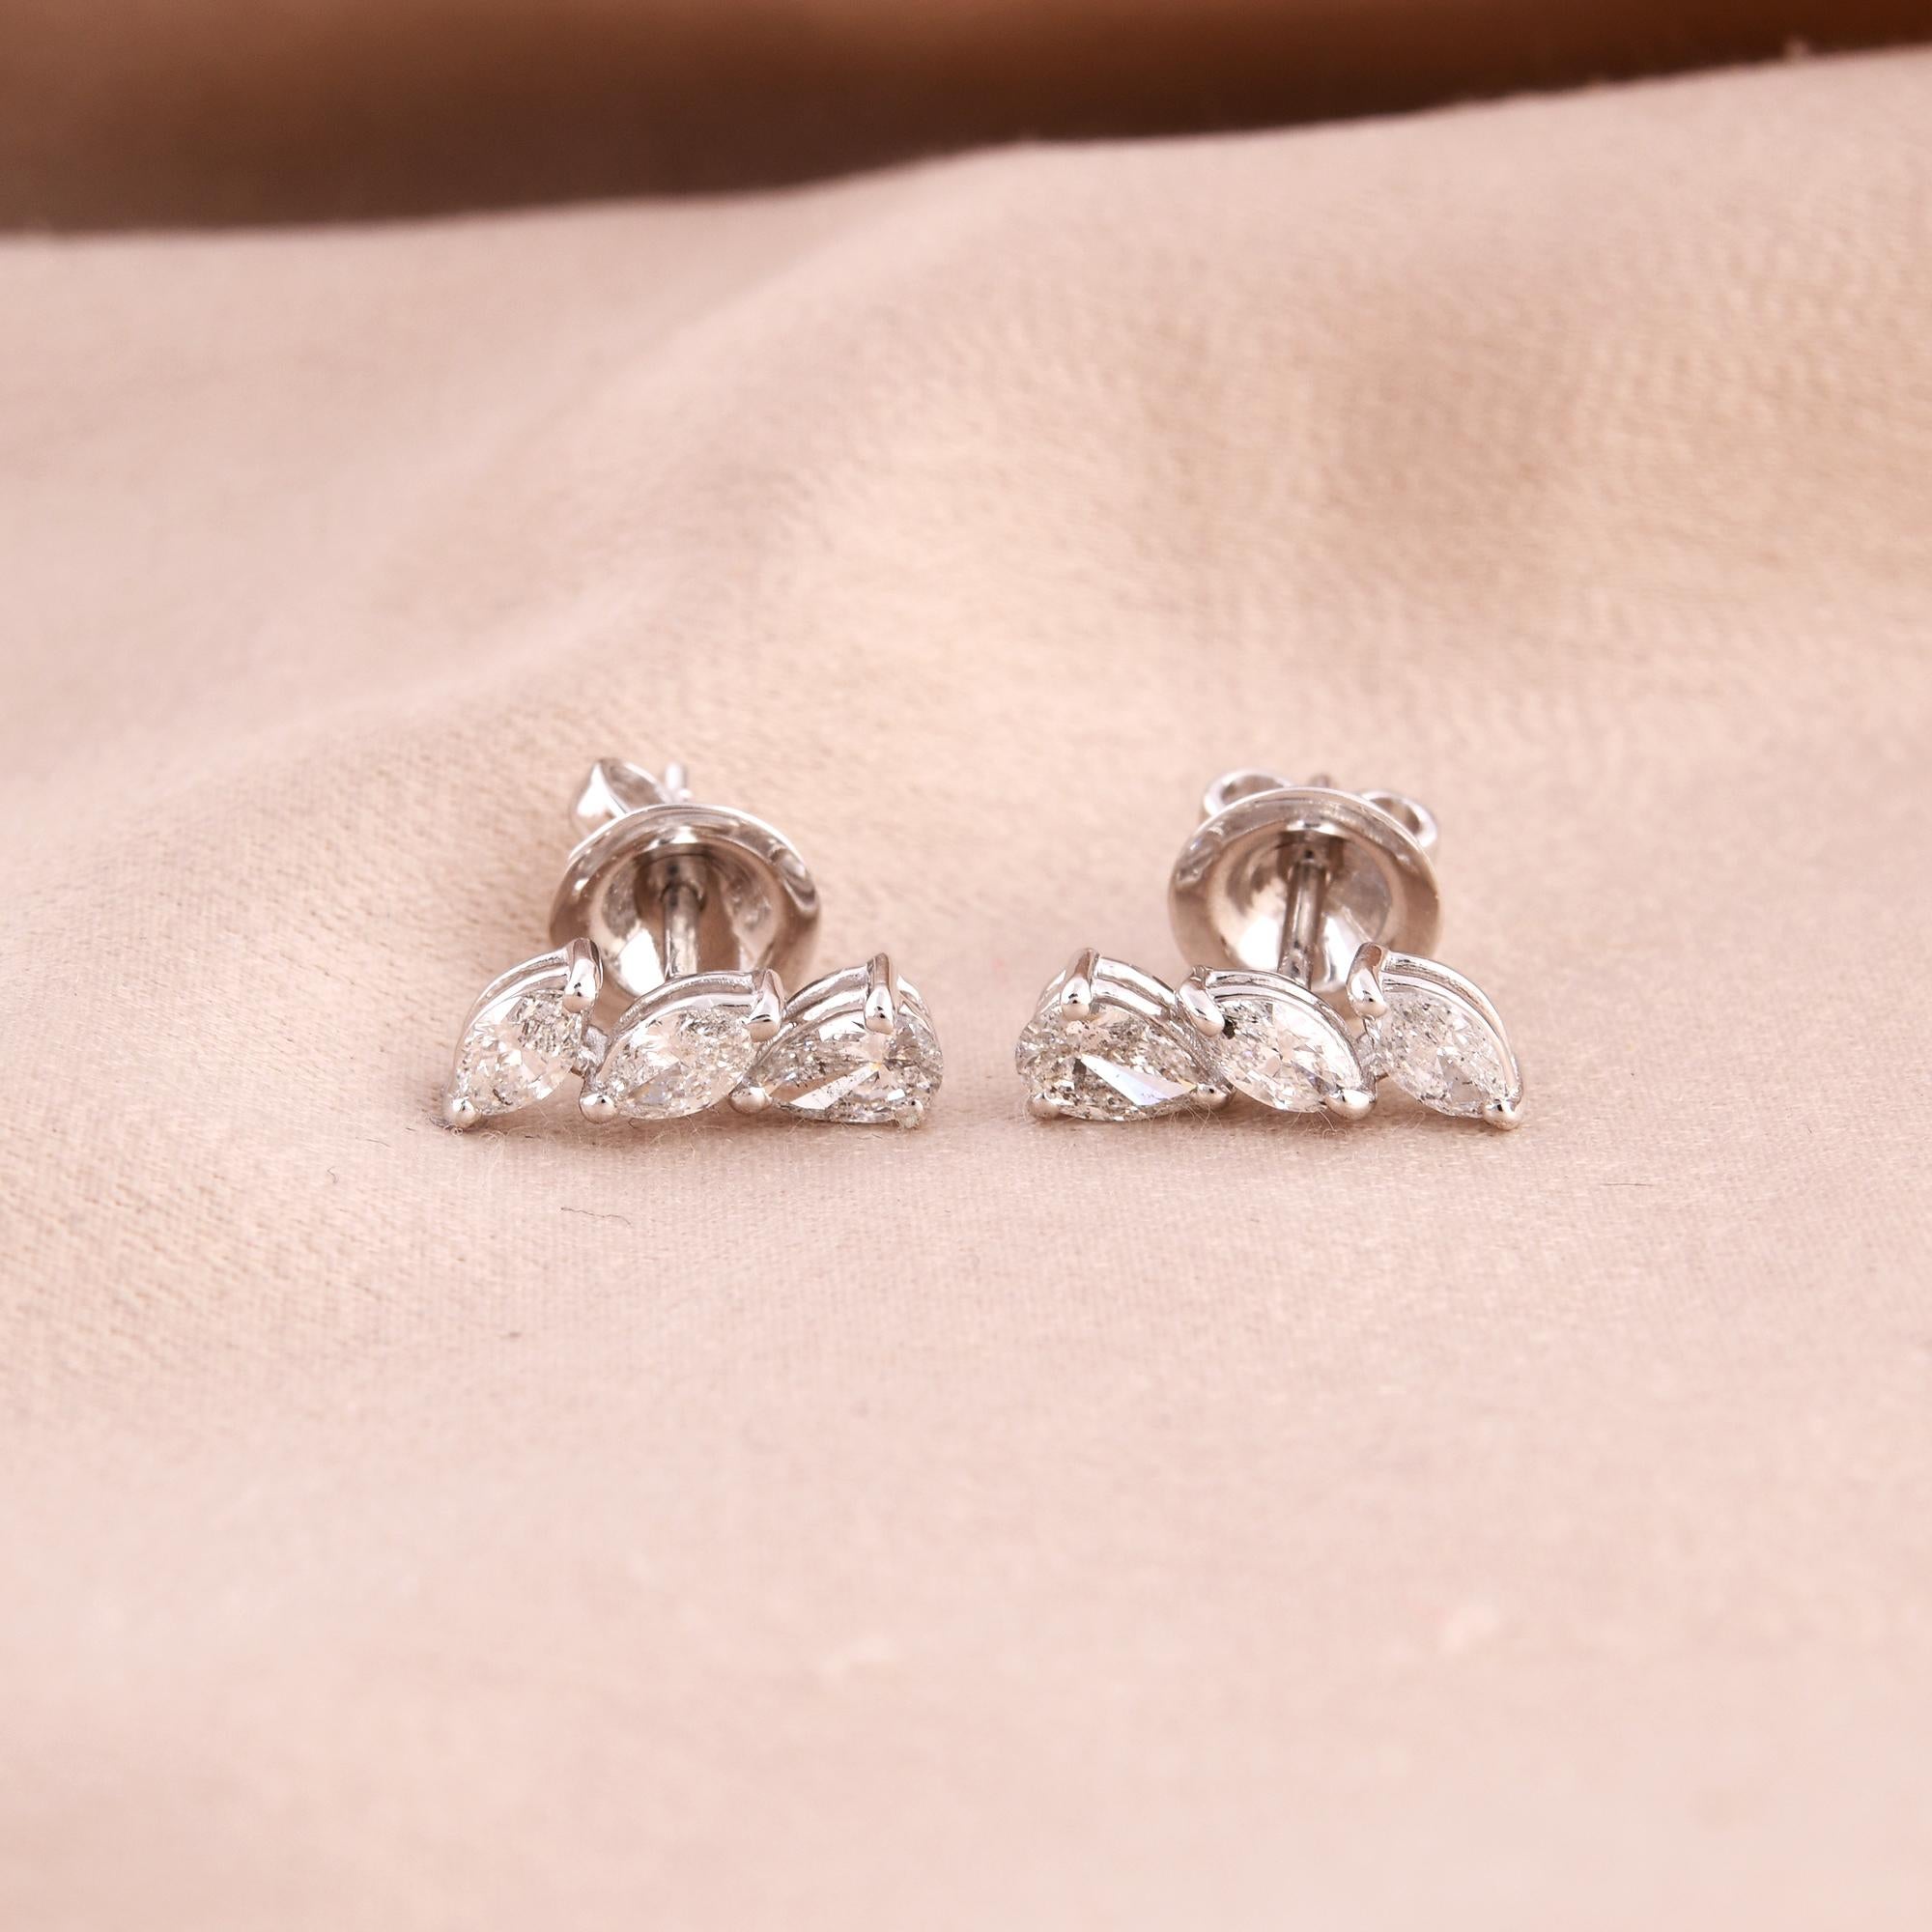 Item Code :- SEE-13235K
Gross Wt. :- 2.38 gm
18k Solid White Gold Wt. :- 2.18 gm
Natural Diamond Wt. :- 1.00 Ct. ( AVERAGE DIAMOND CLARITY SI1-SI2 & COLOR H-I )
Earrings Size :- 13 mm approx.

✦ Sizing
.....................
We can adjust most items